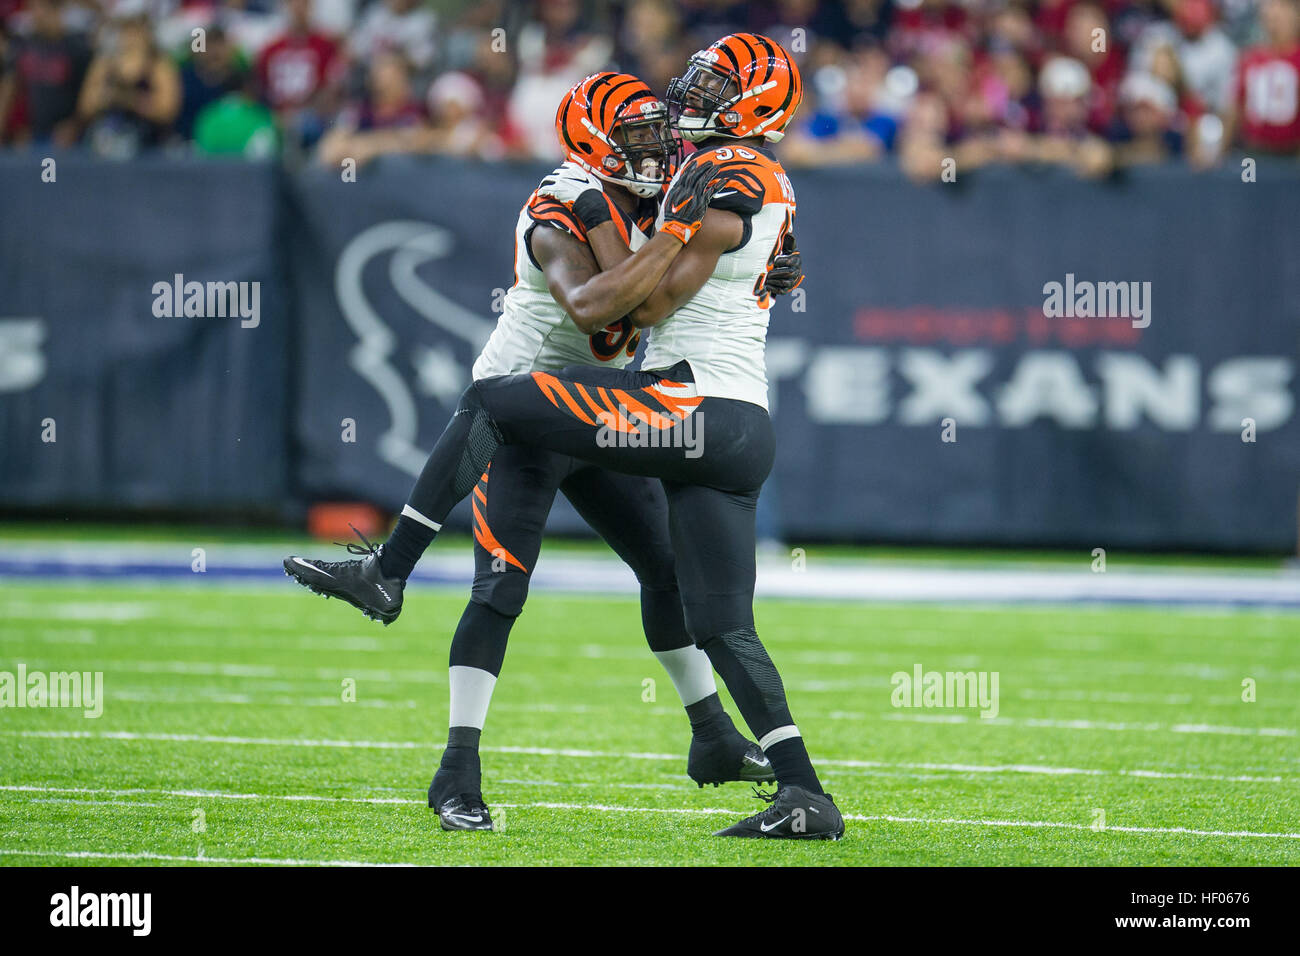 Houston, Texas, USA. 24th Dec, 2016. Cincinnati Bengals defensive end Michael Johnson (90) and Cincinnati Bengals defensive end Wallace Gilberry (95) celebrate a sack during the 1st quarter of an NFL game between the Houston Texans and the Cincinnati Bengals at NRG Stadium in Houston, TX on December 24th, 2016. © Trask Smith/ZUMA Wire/Alamy Live News Stock Photo